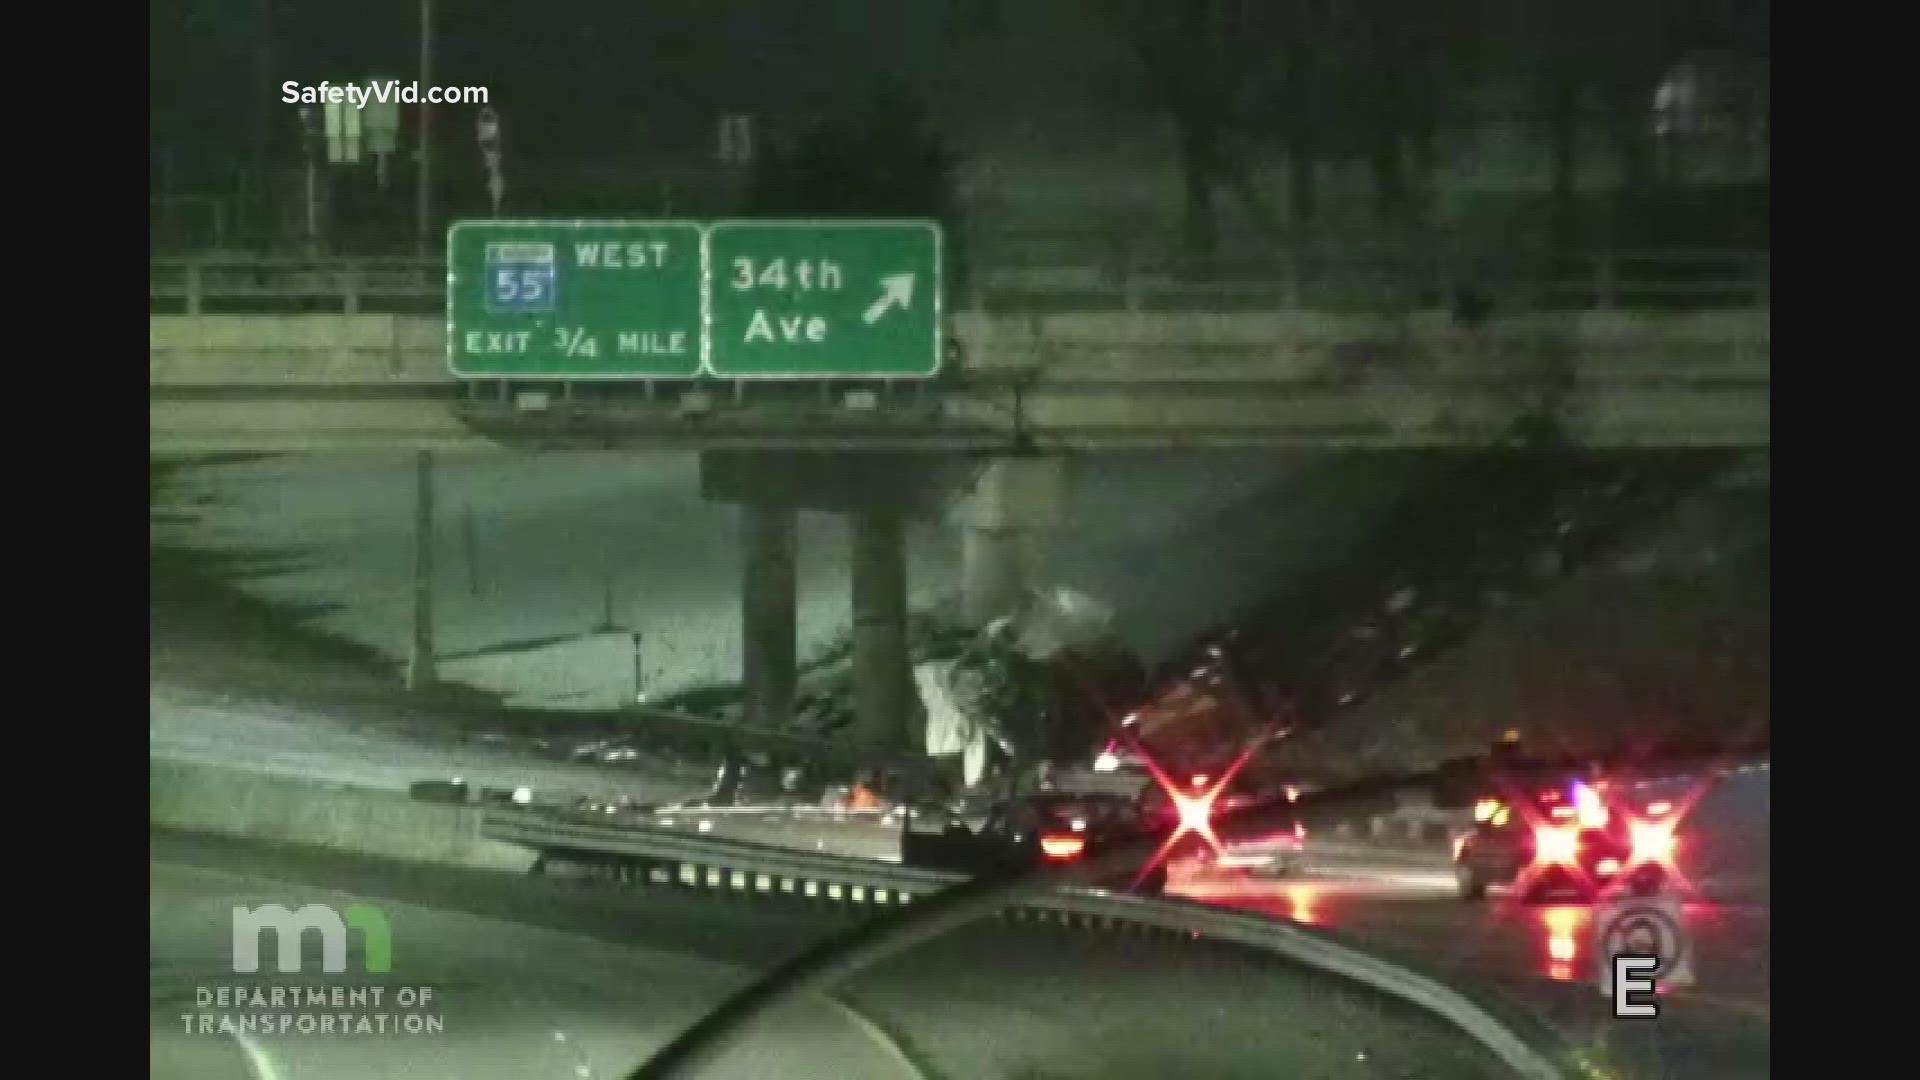 MnDOT traffic cameras capture the aftermath of a fatal crash on Highway 62 at the 34th Ave. bridge, and then what appears to be a collision between first responders.